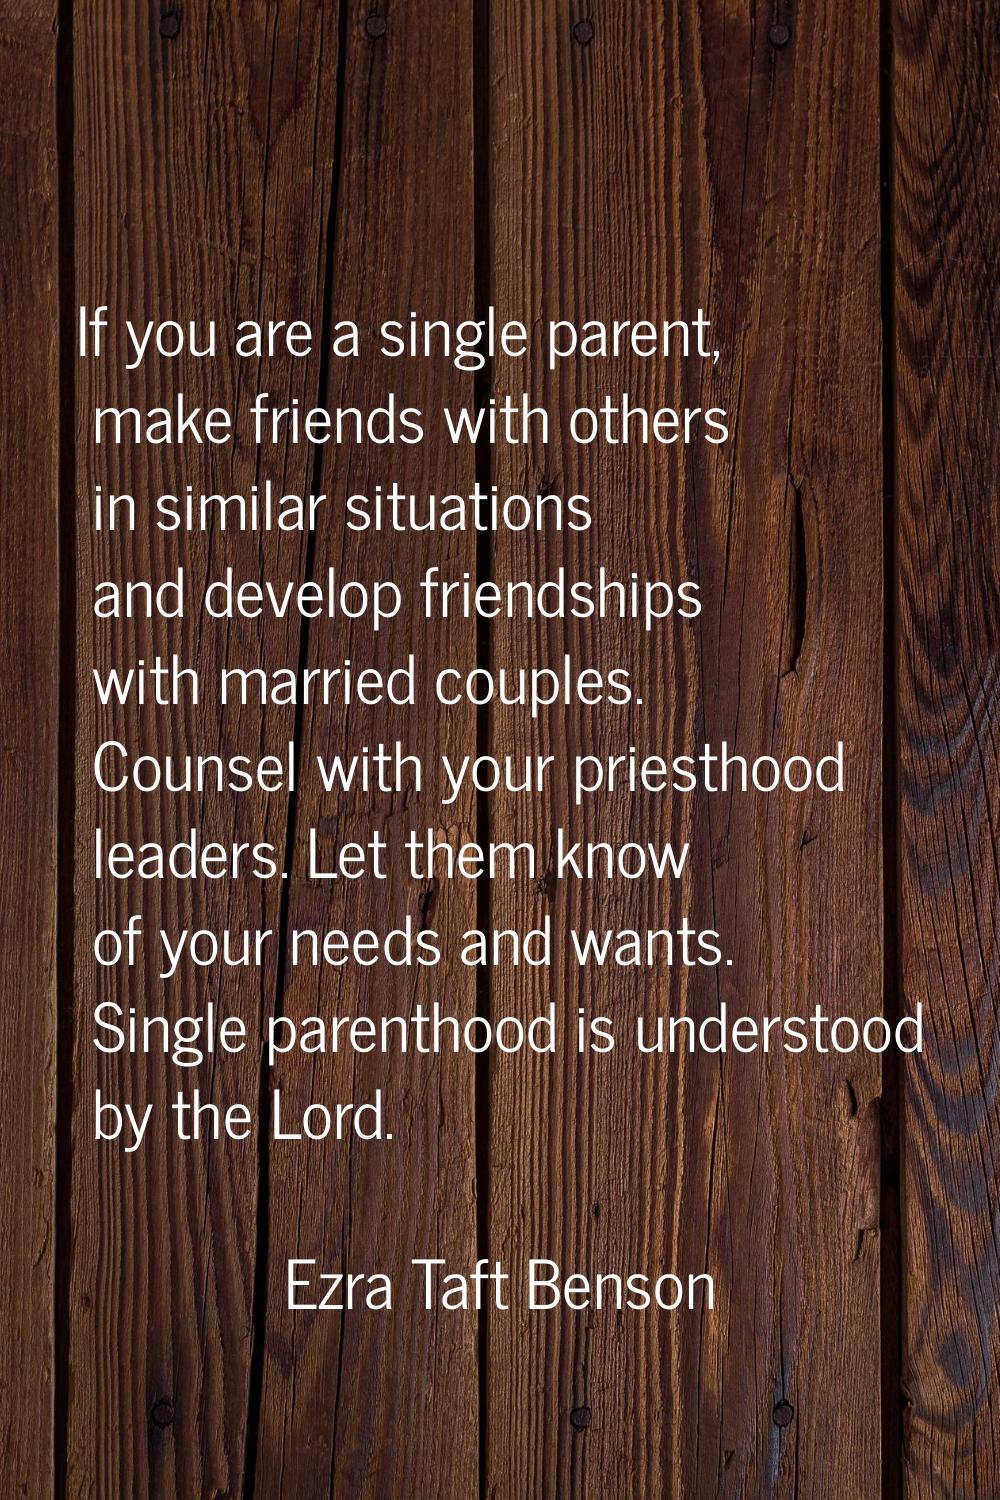 If you are a single parent, make friends with others in similar situations and develop friendships 